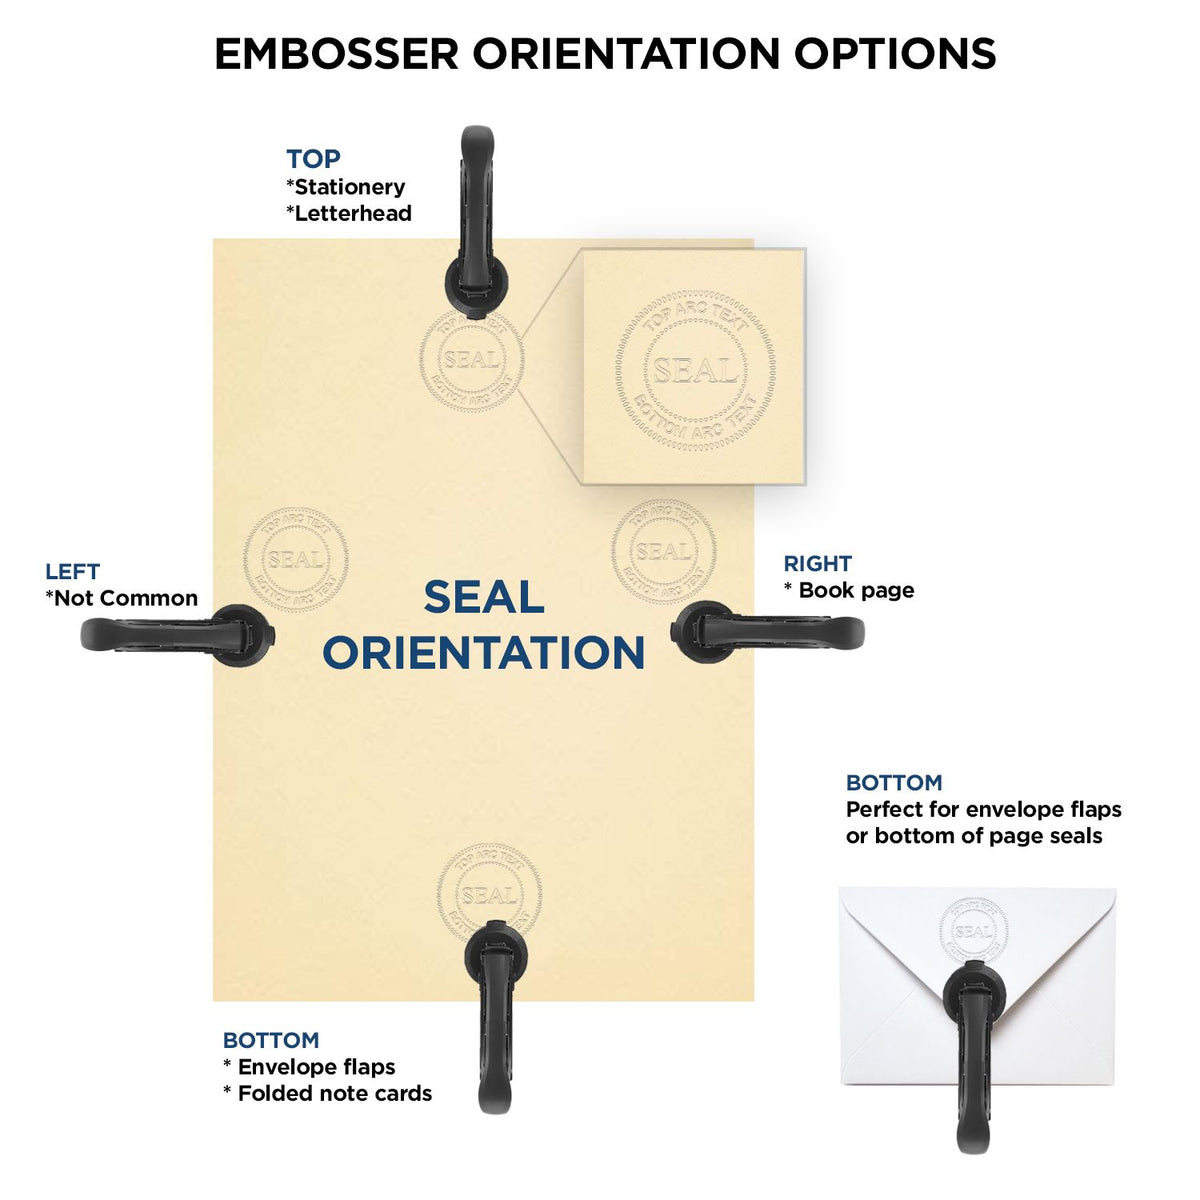 An infographic for the Extended Long Reach Guam Surveyor Embosser showing embosser orientation, this is showing examples of a top, bottom, right and left insert.